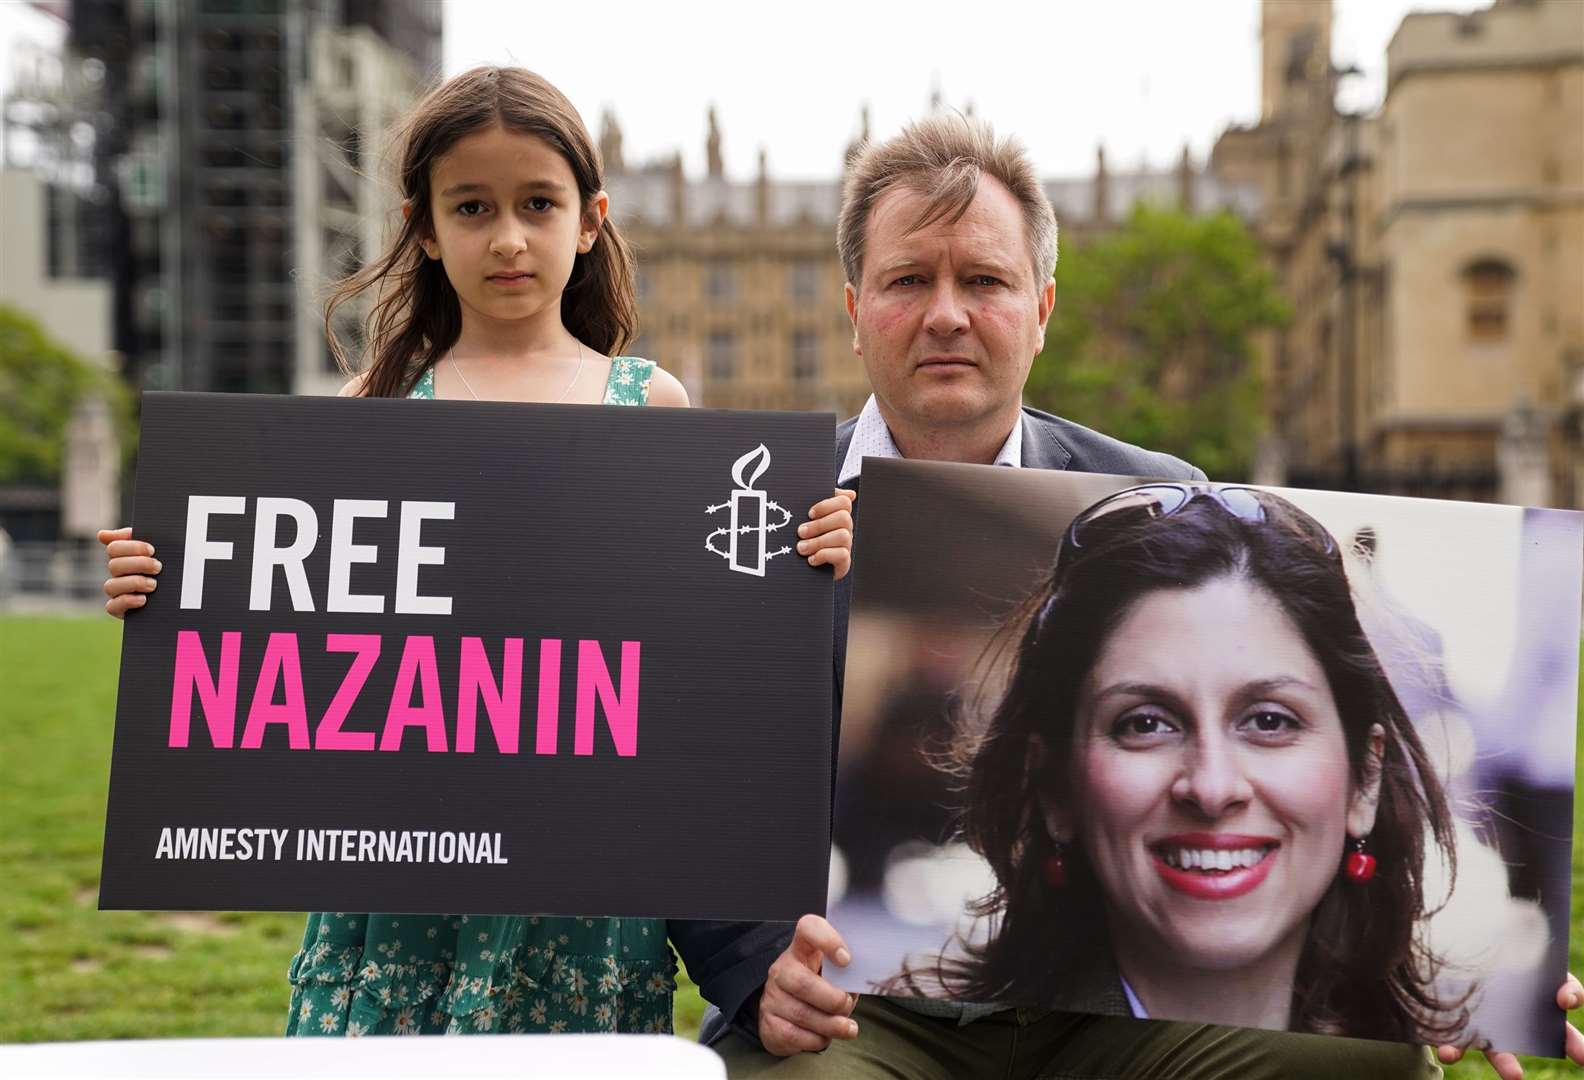 Richard Ratcliffe and his daughter Gabriella have campaigned for years for Nazanin Zaghari-Ratcliffe's release. Picture: PA